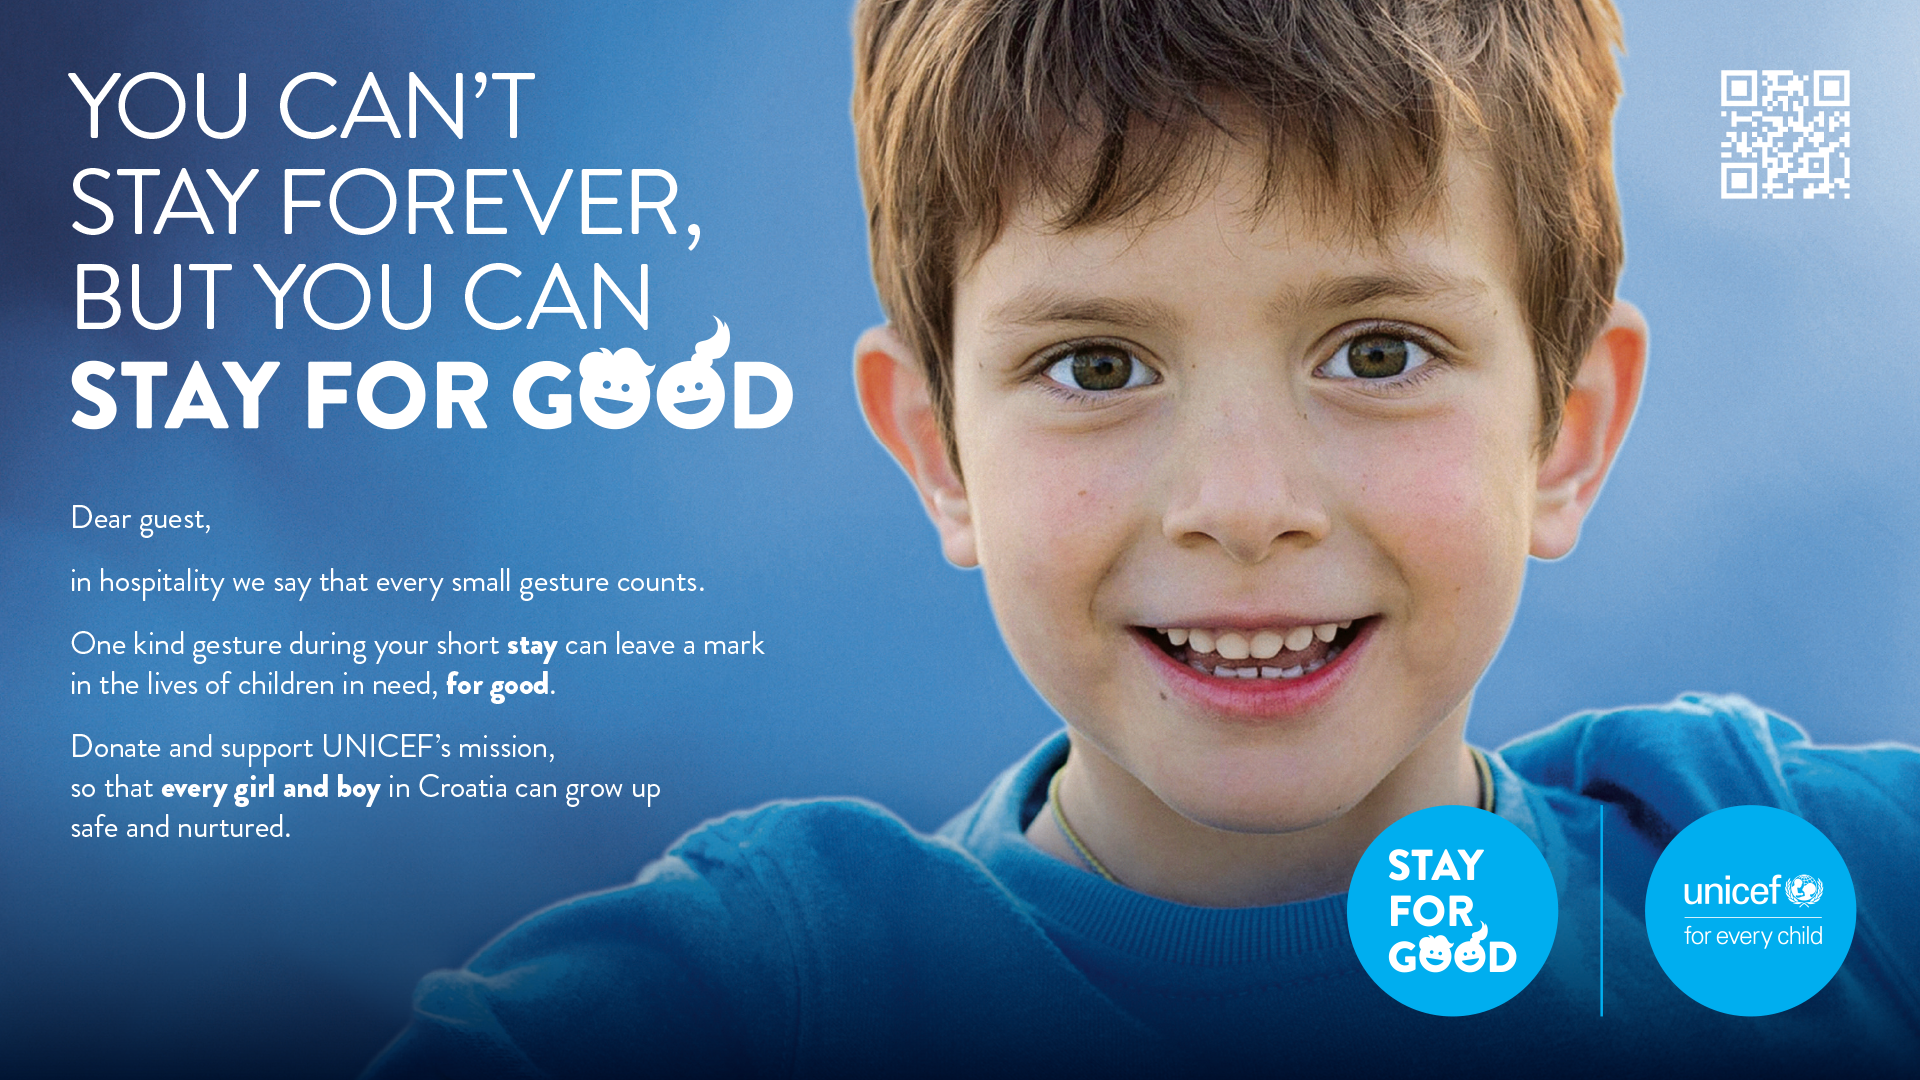 Unicef - Stay for good campaign